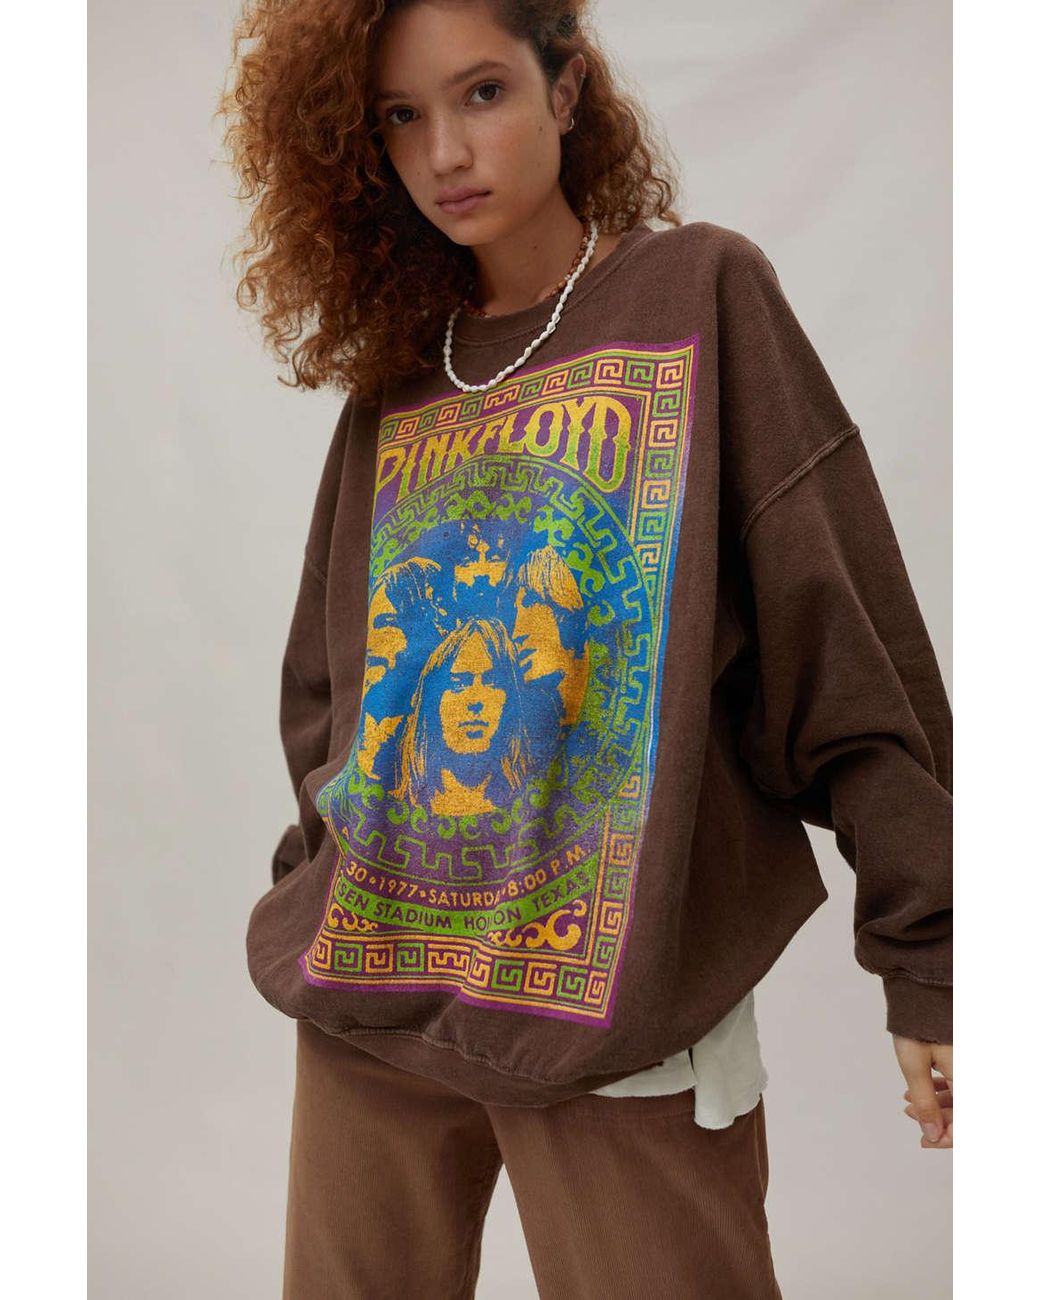 Urban Outfitters Pink Floyd 1977 Tour Crew Neck Sweatshirt in Brown | Lyst